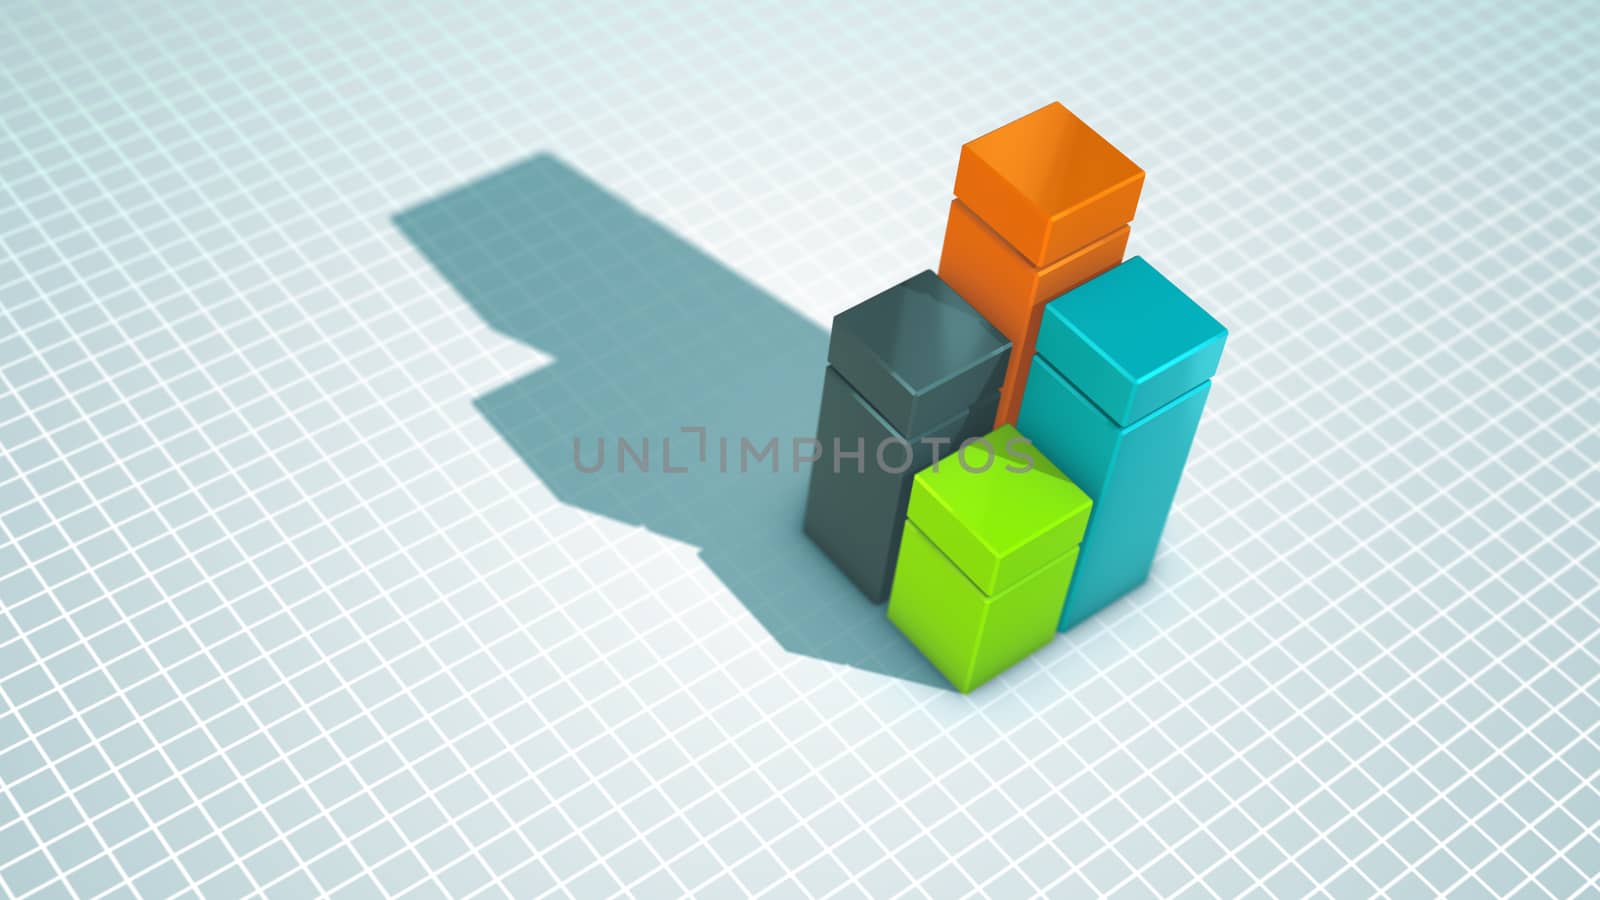 Splendid 3d illustration of four cubic squares of golden, blue, green and black colors placed on a celeste surface covered with a meshwork and having a big shadow. They form a diagram